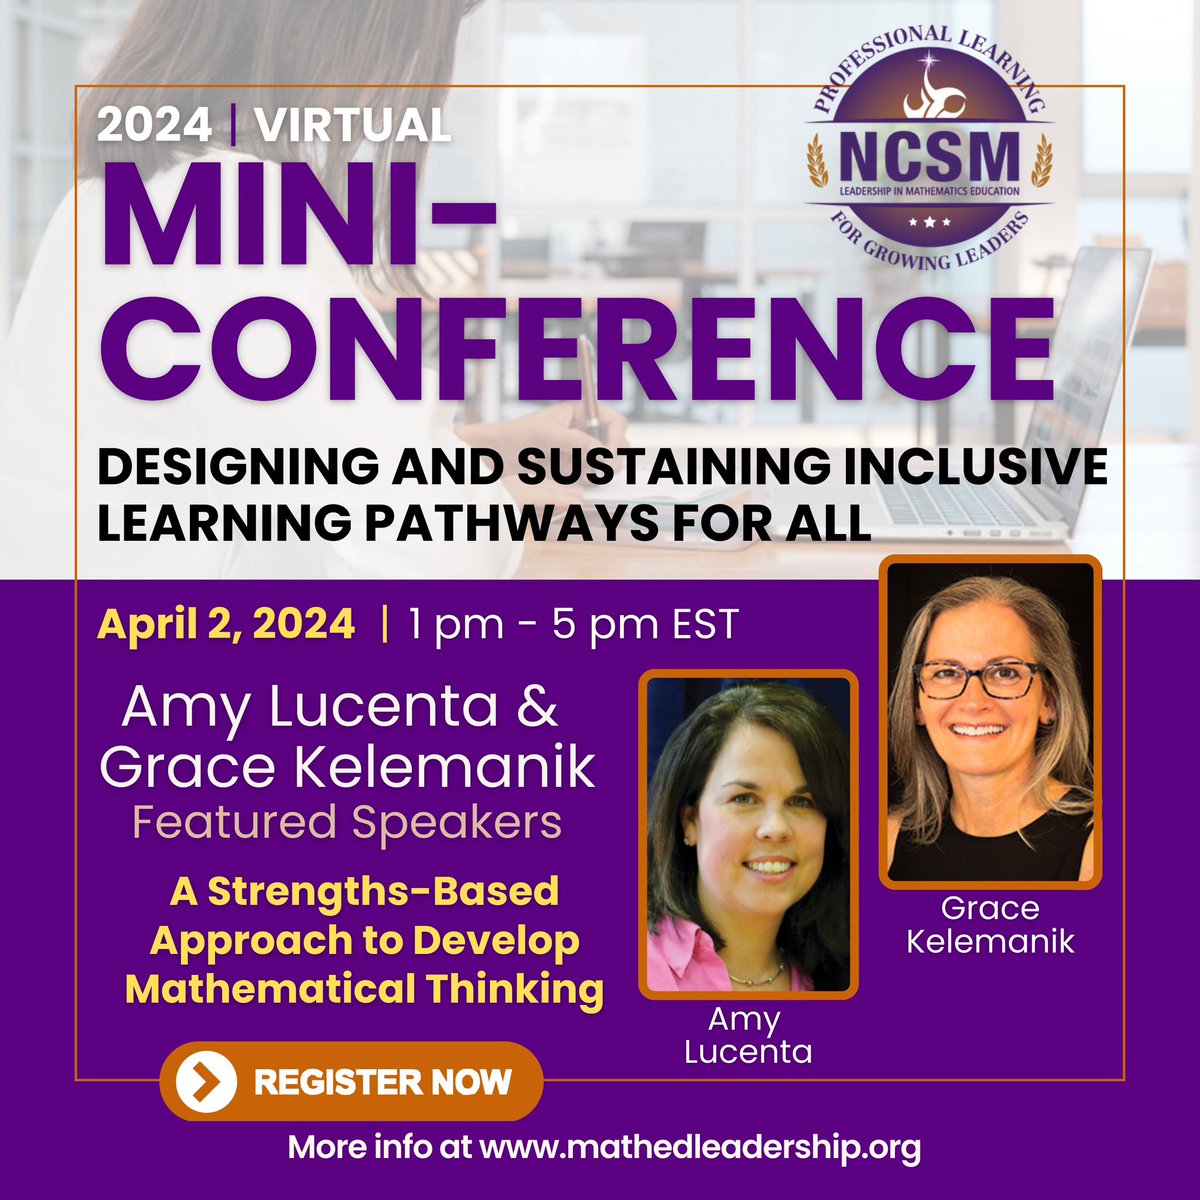 🔎Featured Session at NCSM’s Virtual Mini-Conference: Learn from Grace Kelemanik & Amy Lucenta, & explore pedagogical strategies designed to leverage students’ strengths to develop mathematical thinking in all students. Register TODAY ncsm.memberclicks.net/2024-virtual-m… #NCSMBOLD #April2nd